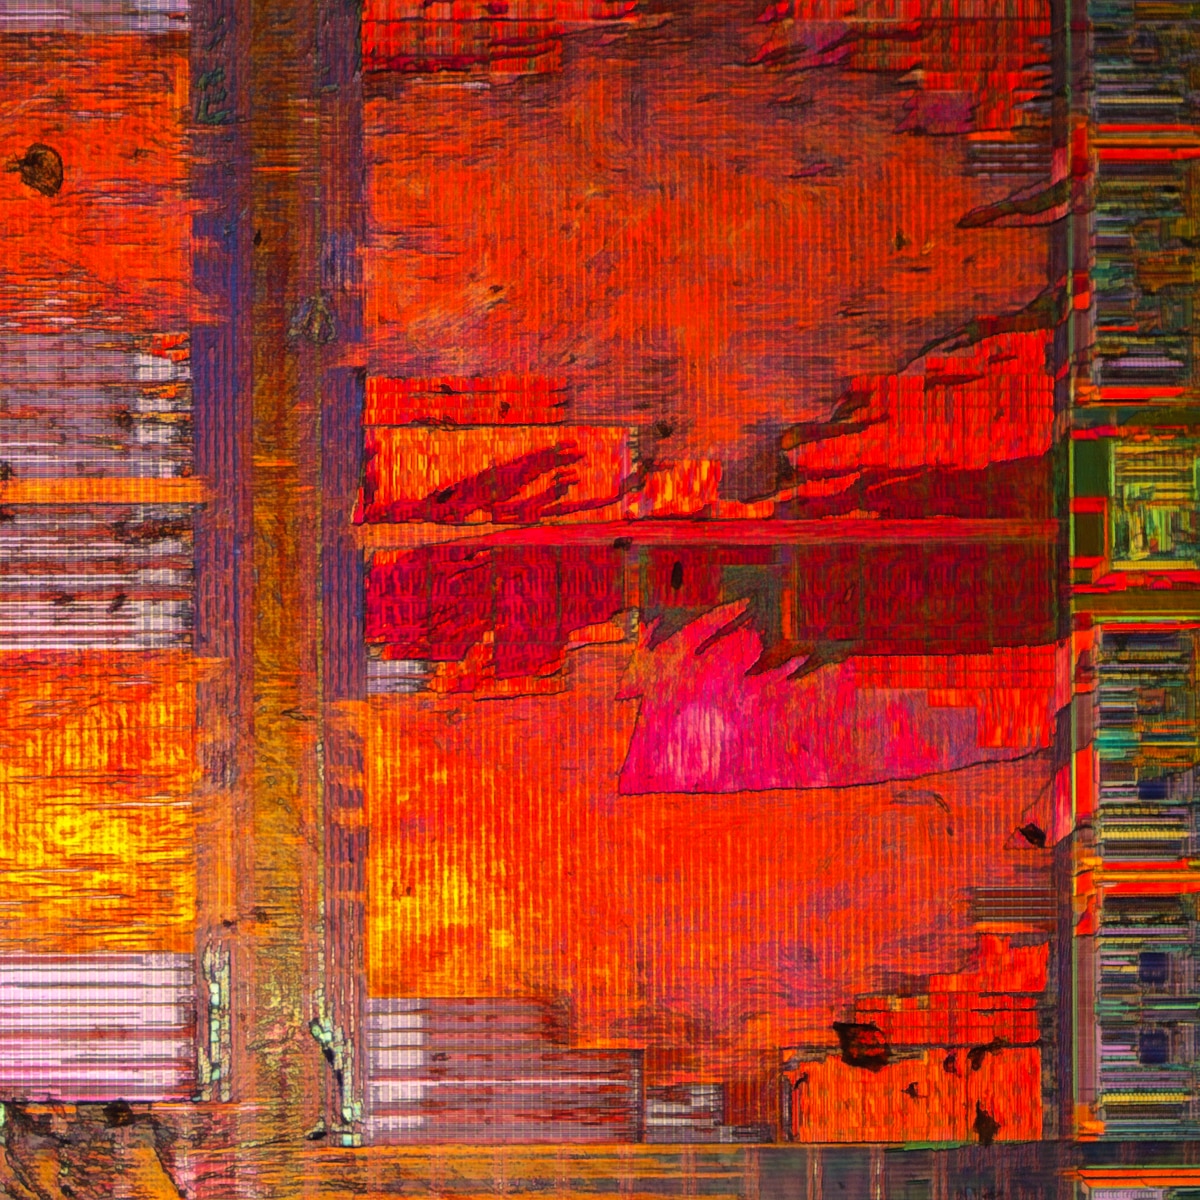 Photomicrograph of a microchip at 4X.